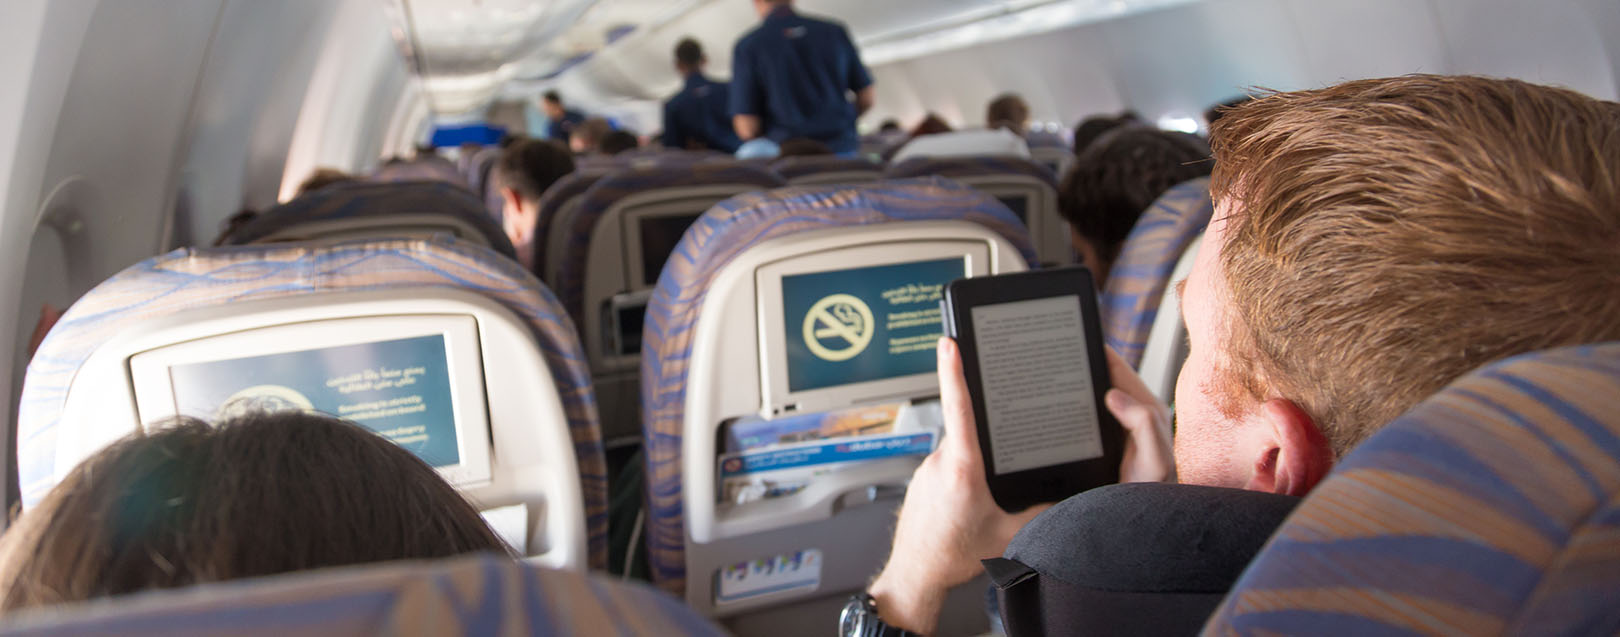 UK joins US airline electronics ban